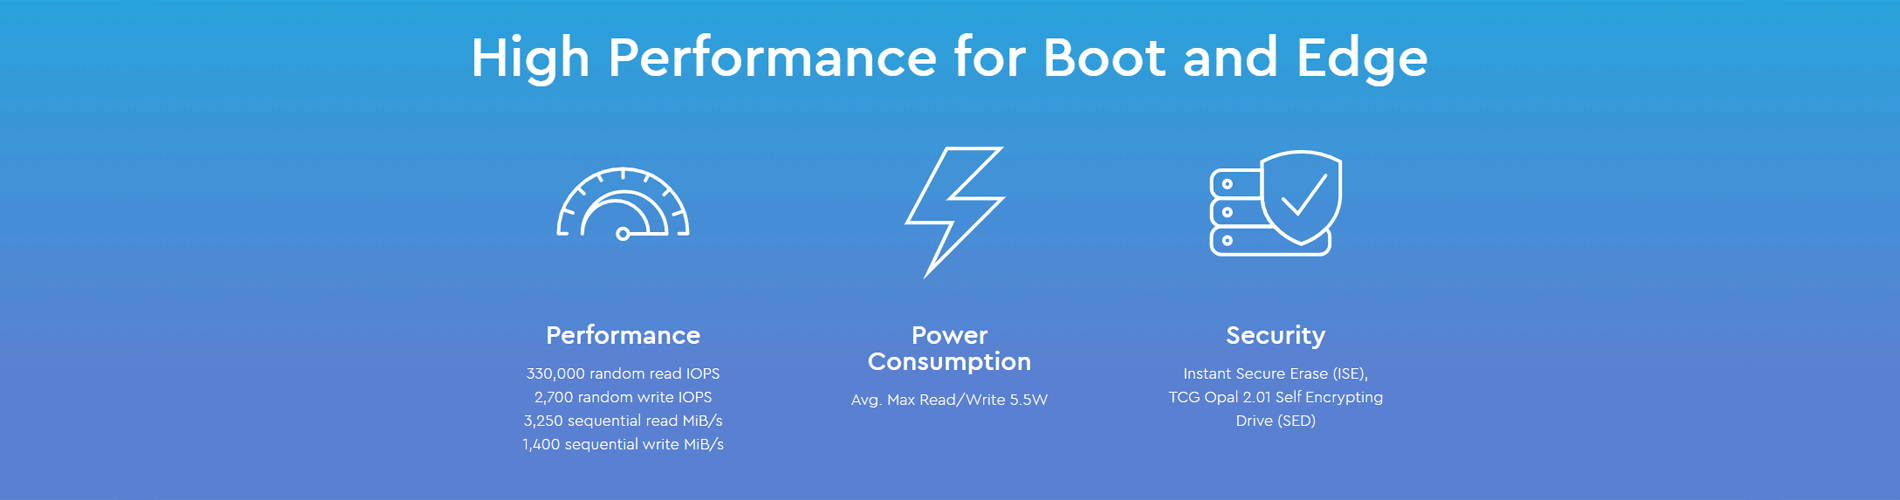 High Performance for Boot and Edge